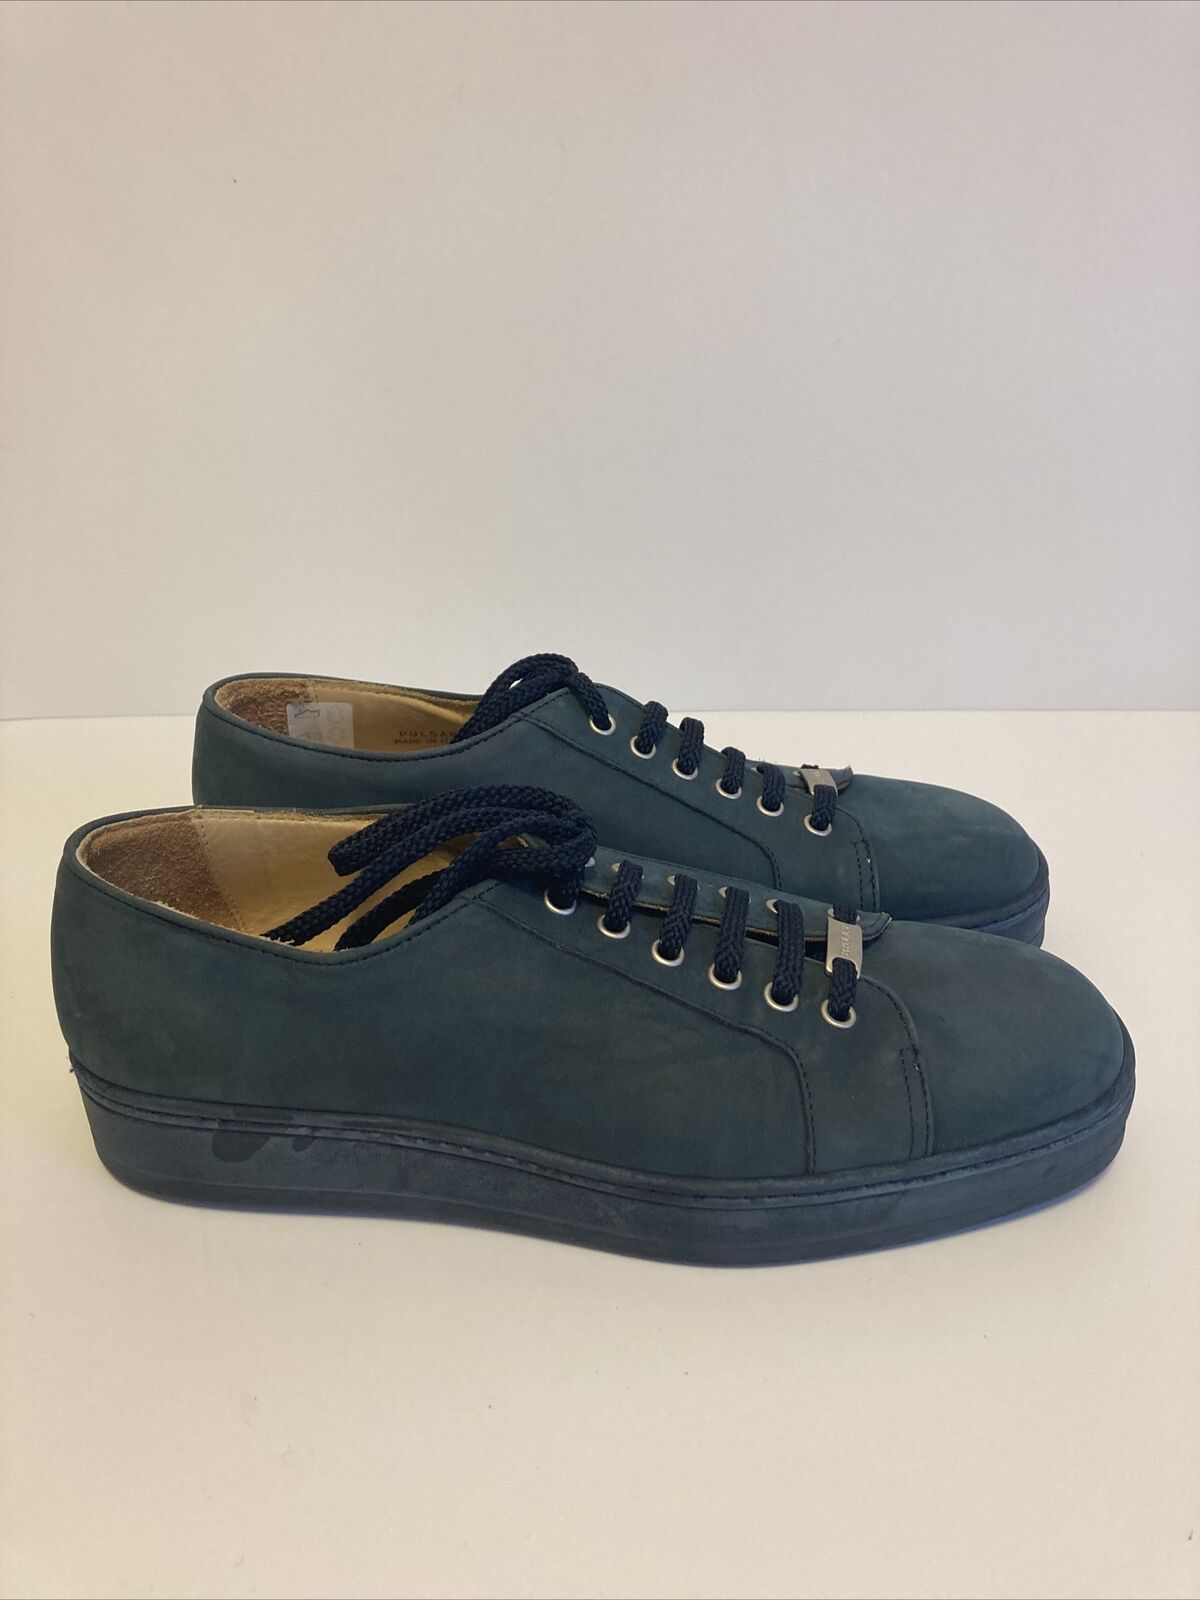 Bally Switzerland Pulsar Blue Nubuck Lace Up Sneakers Shoes Size 8